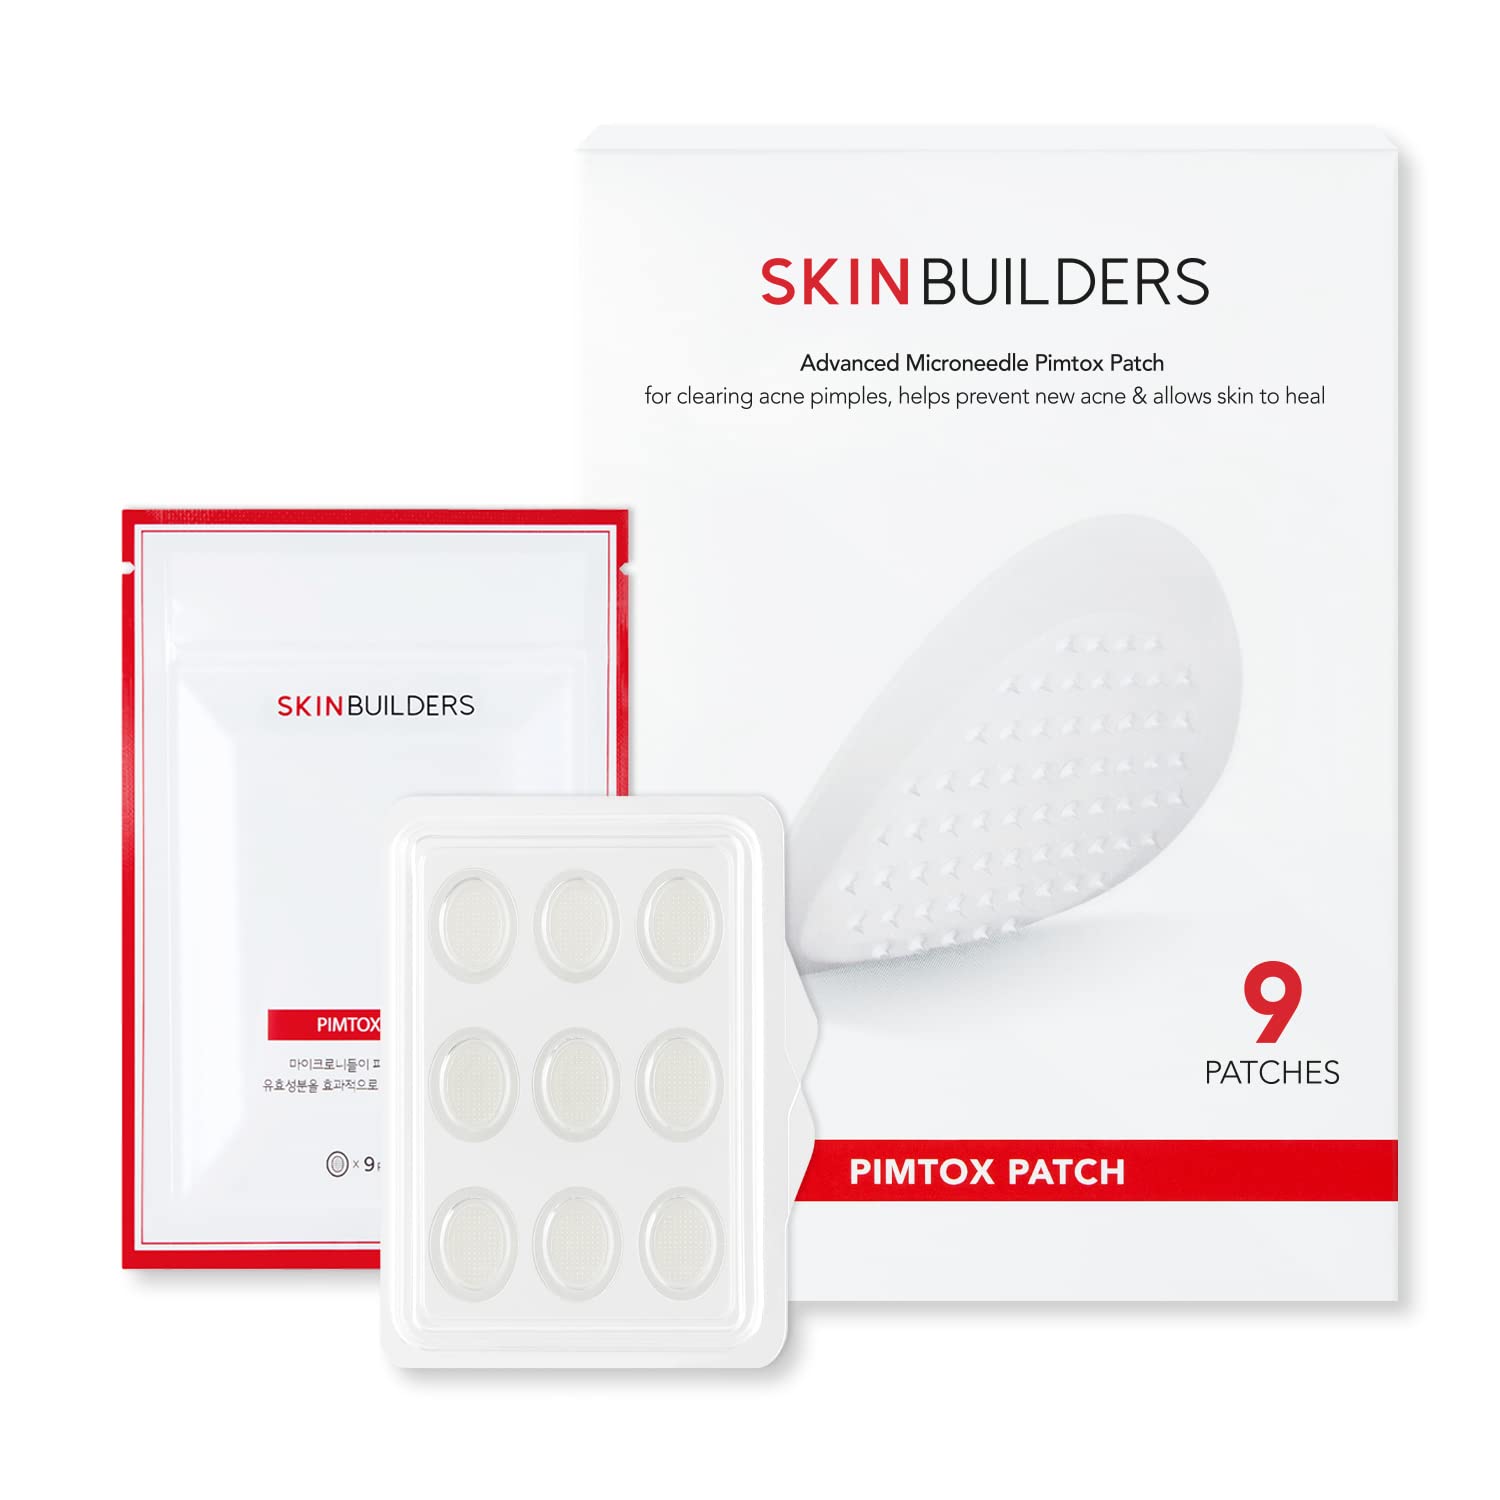 Book Cover SKINBUILDERS Pimple patches, Microneedle, Acne treatment Pimple, PimTox acne patches for hormonal acne and blemishes, Zit Patches, Patented Microneedles (9), Korean skin care